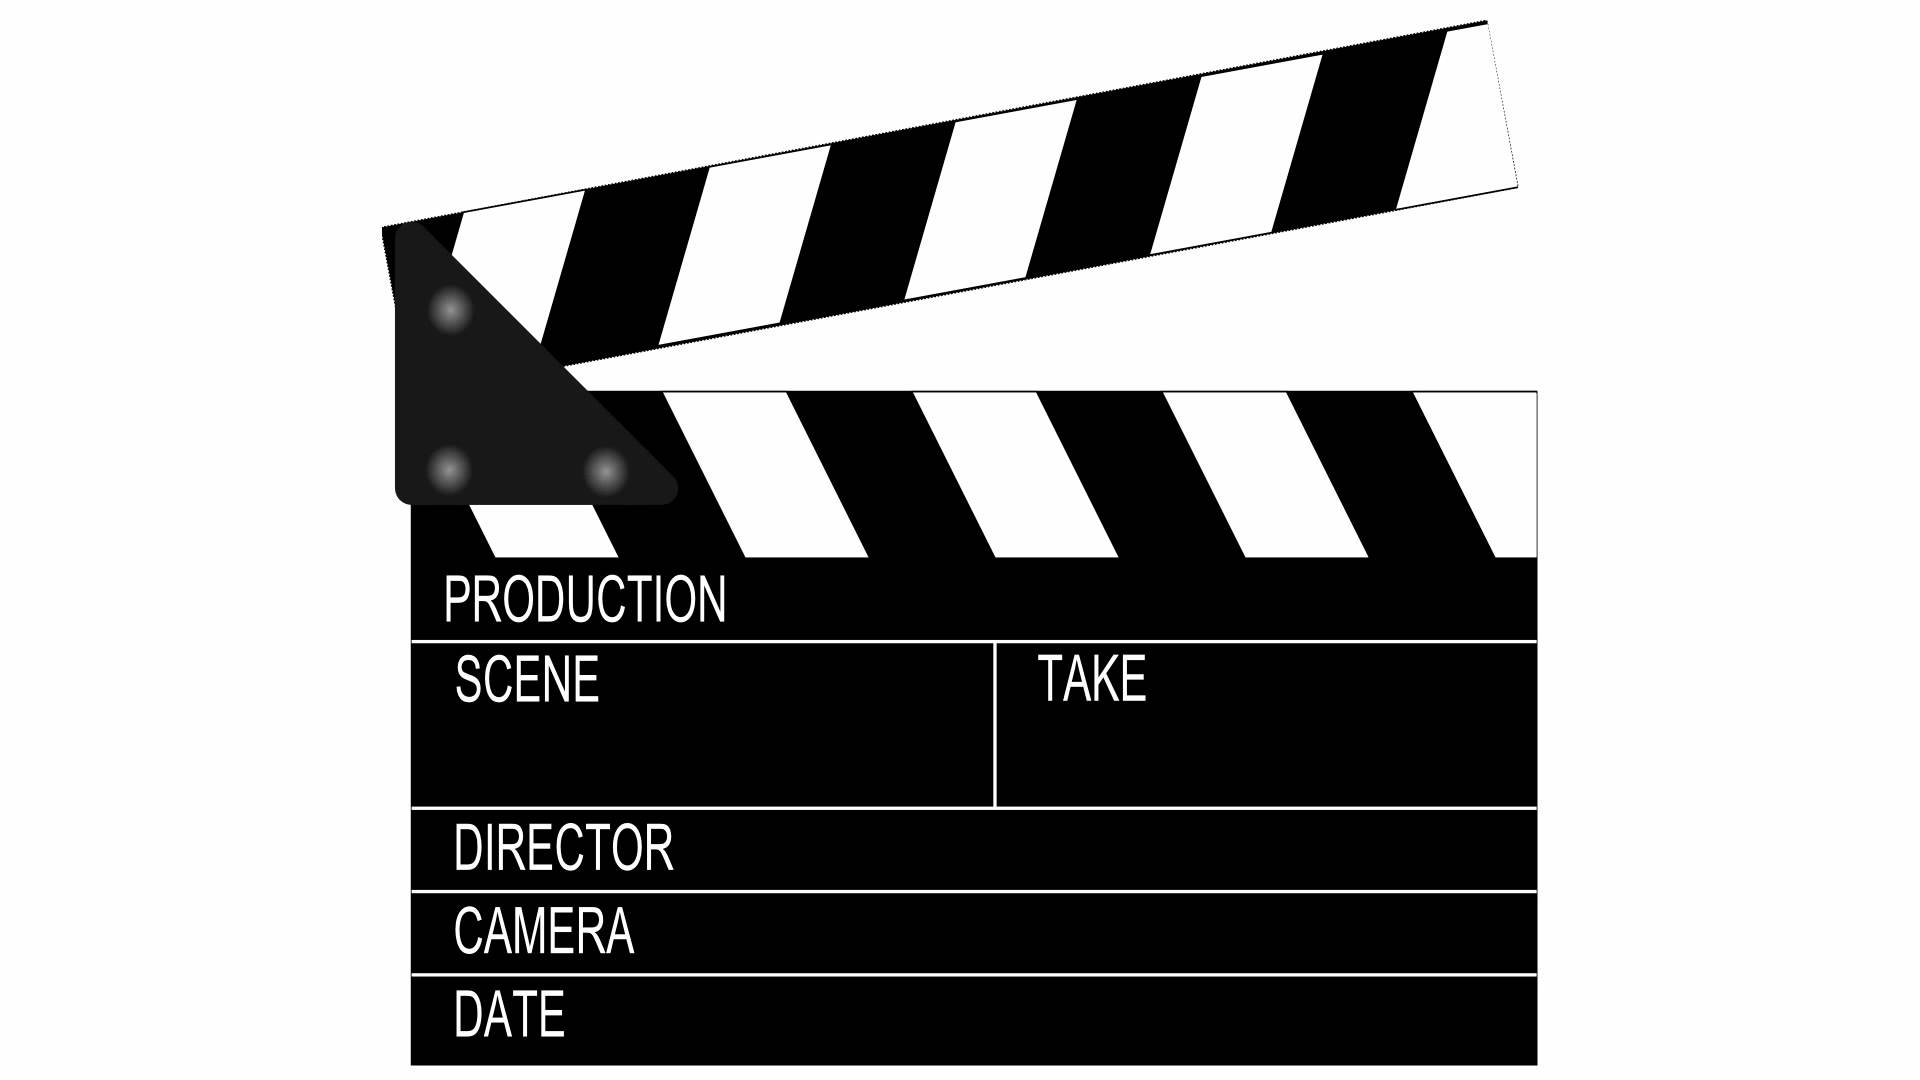 Action" film director sound effect - YouTube